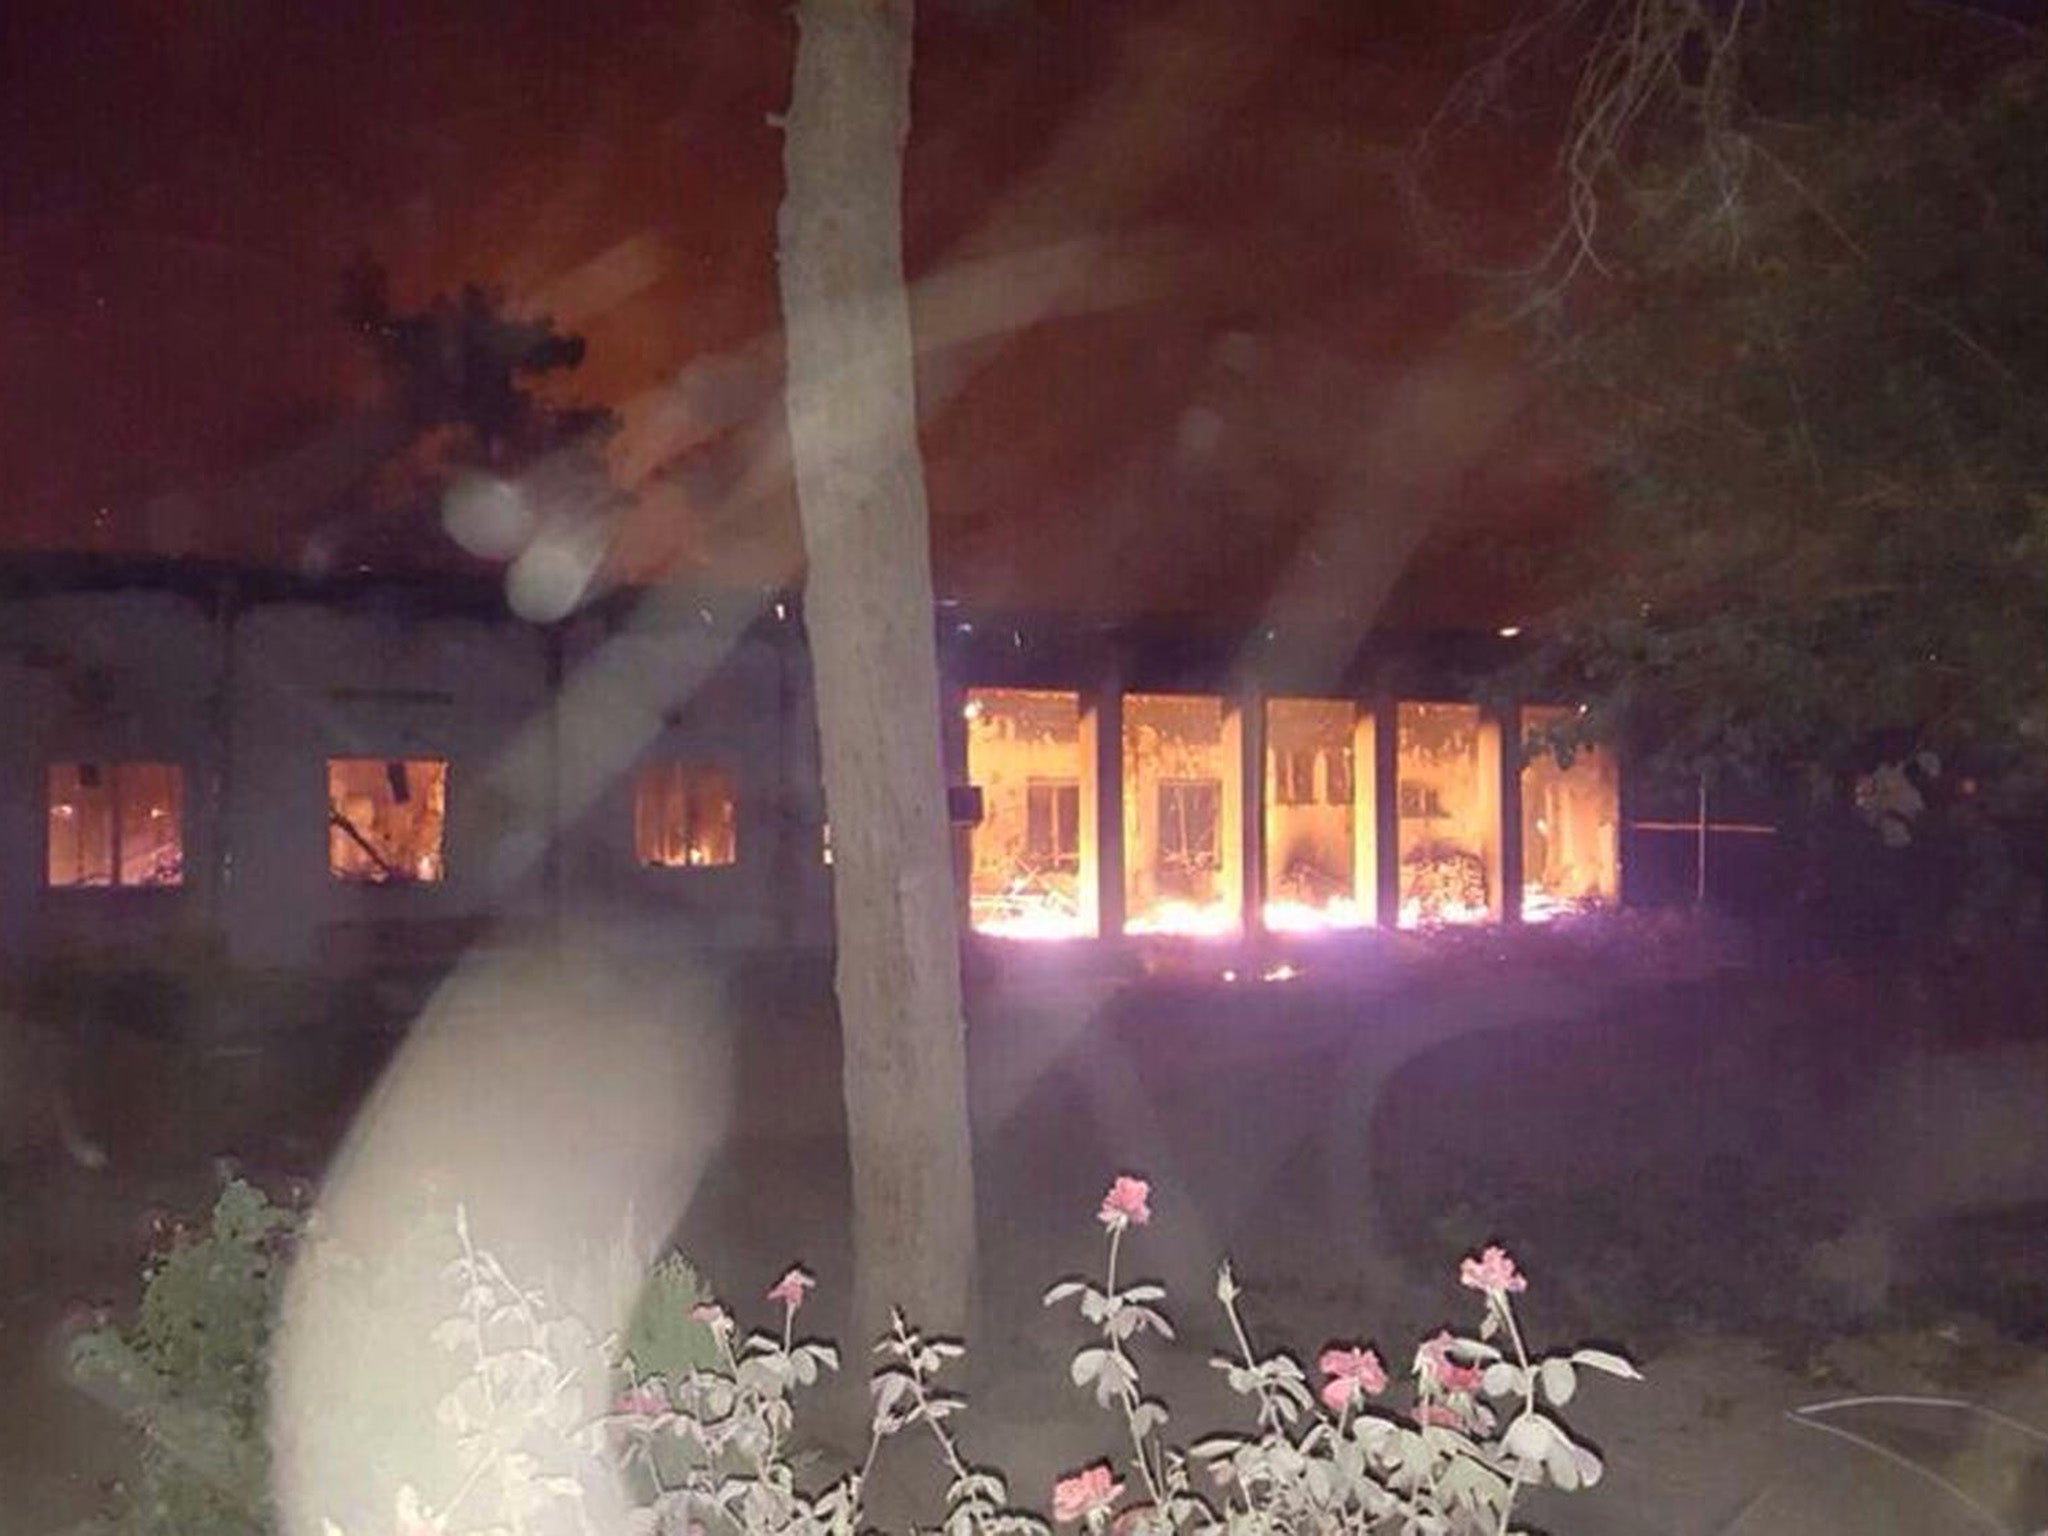 The Doctors Without Borders hospital is seen in flames, after an explosion in the northern Afghan city of Kunduz